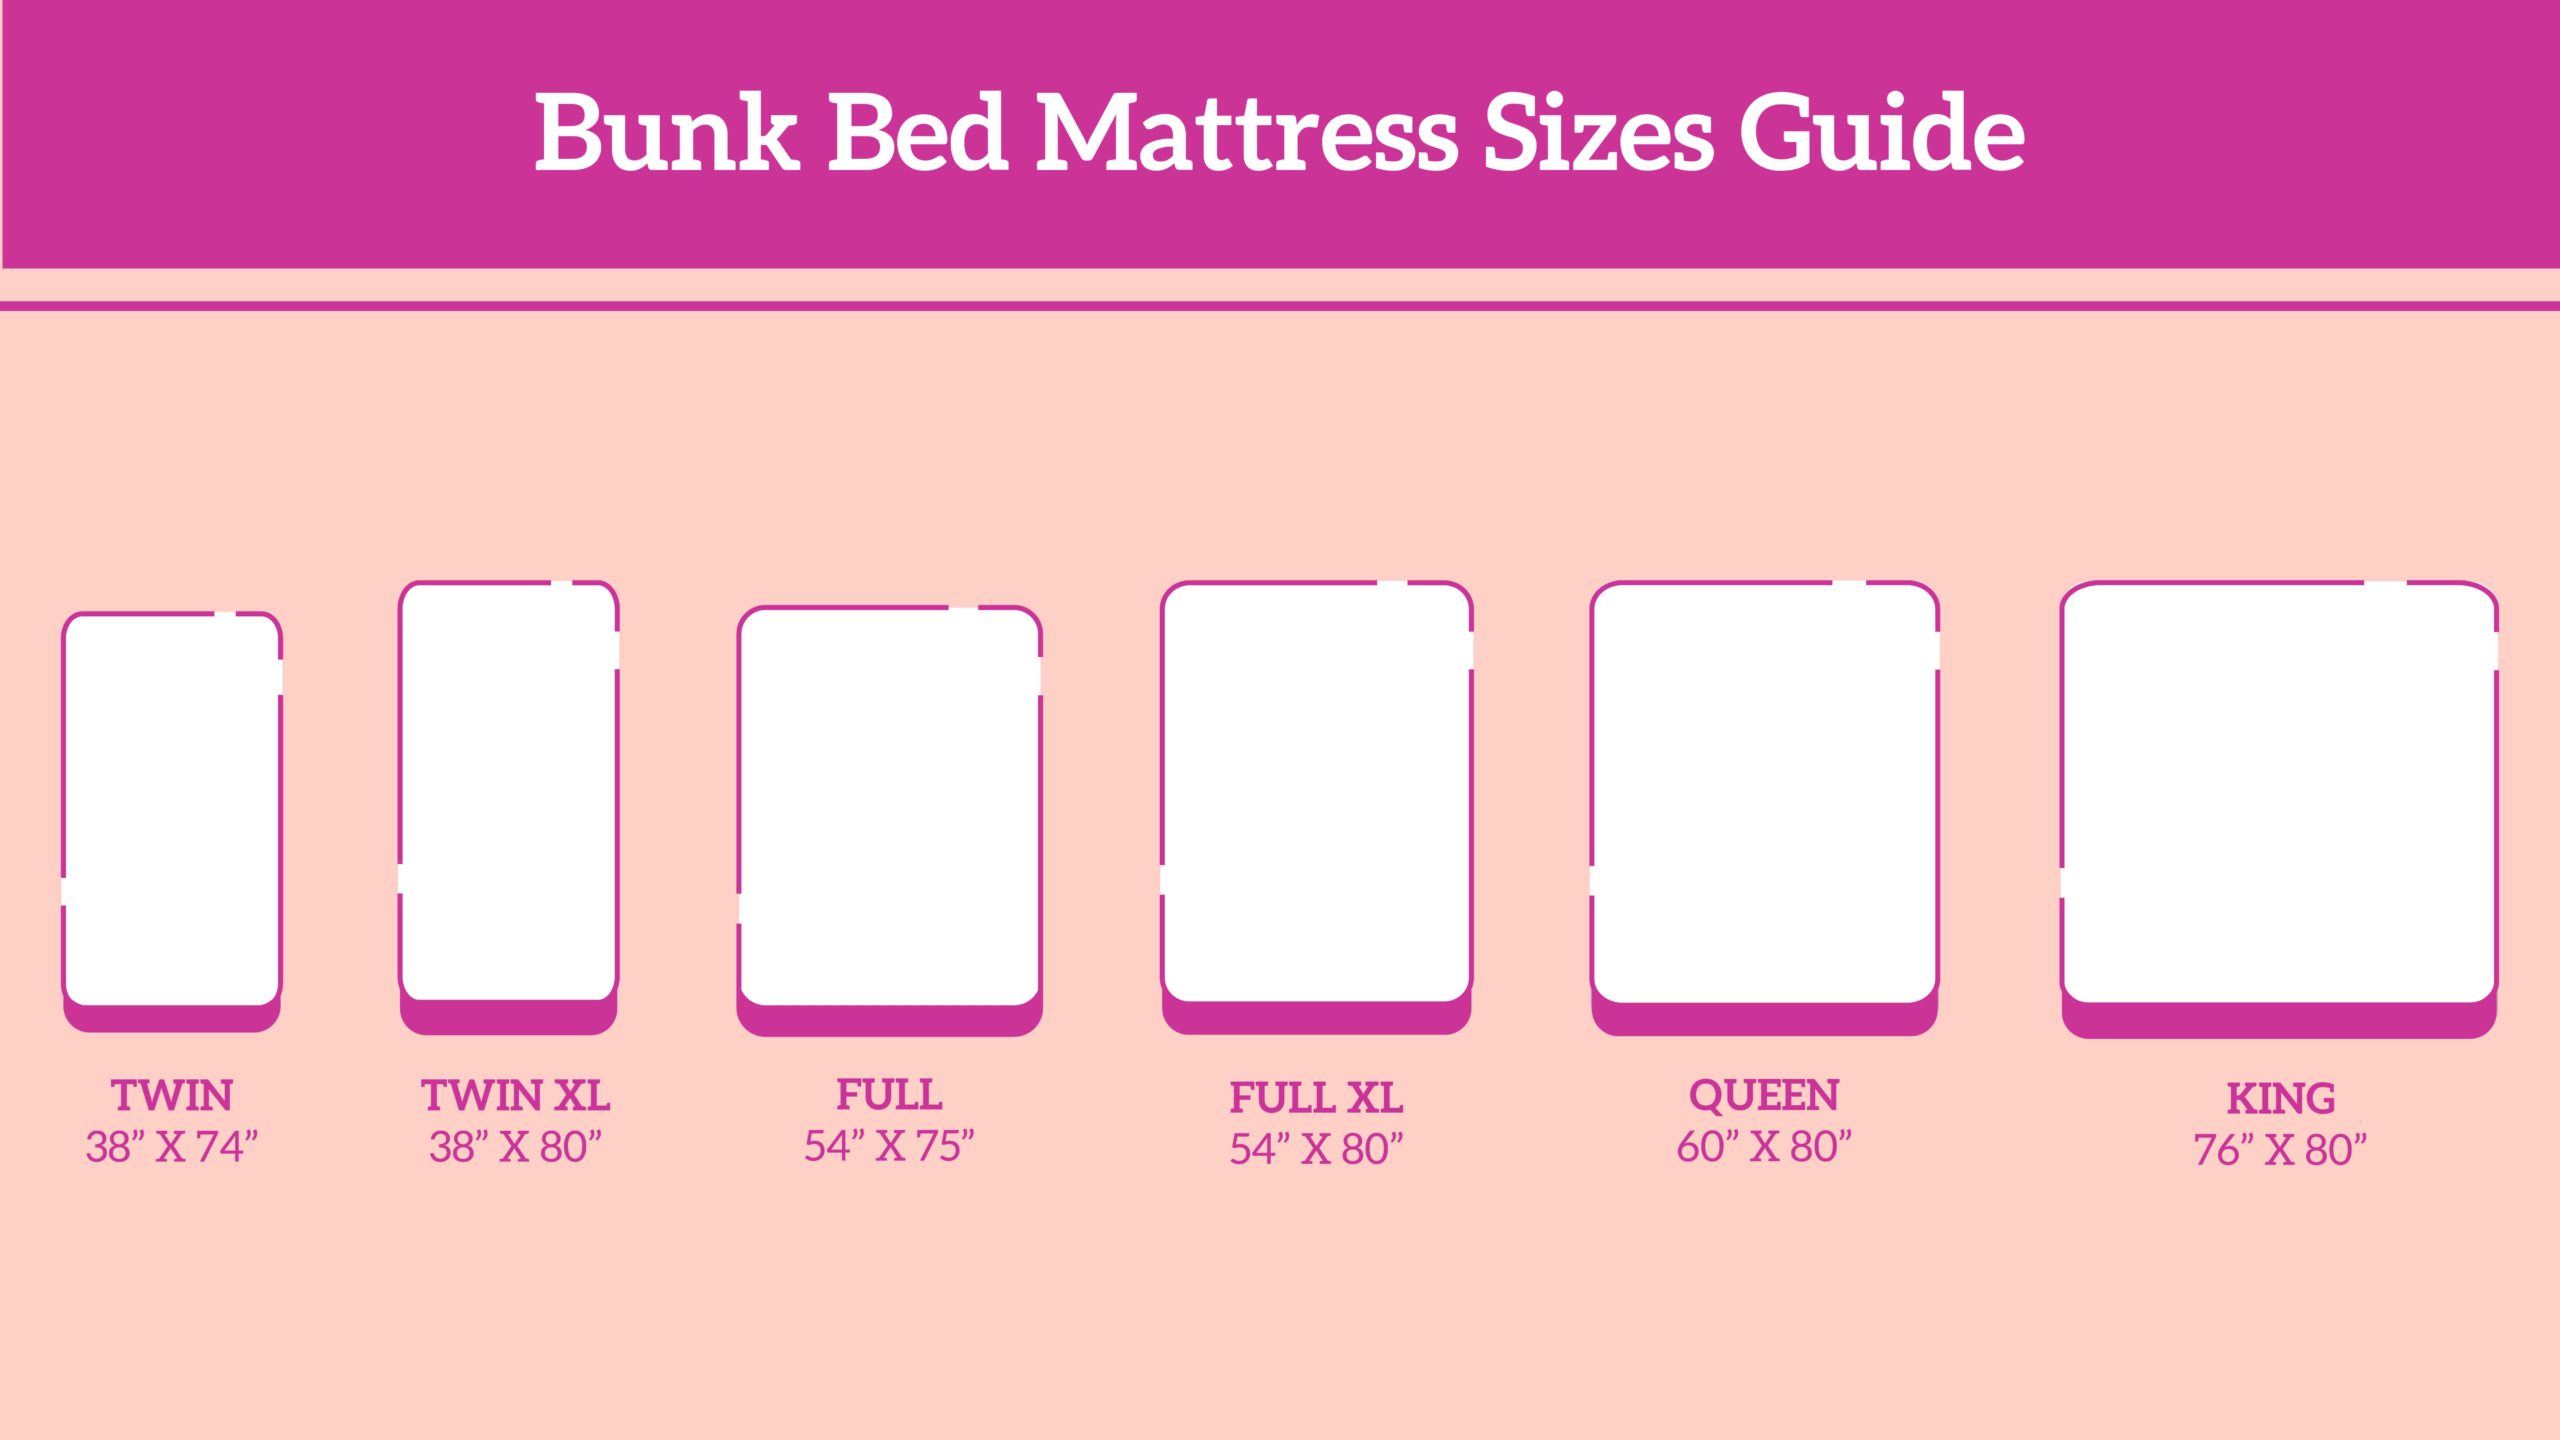 Different Sizes Of Bunk Bed Mattress